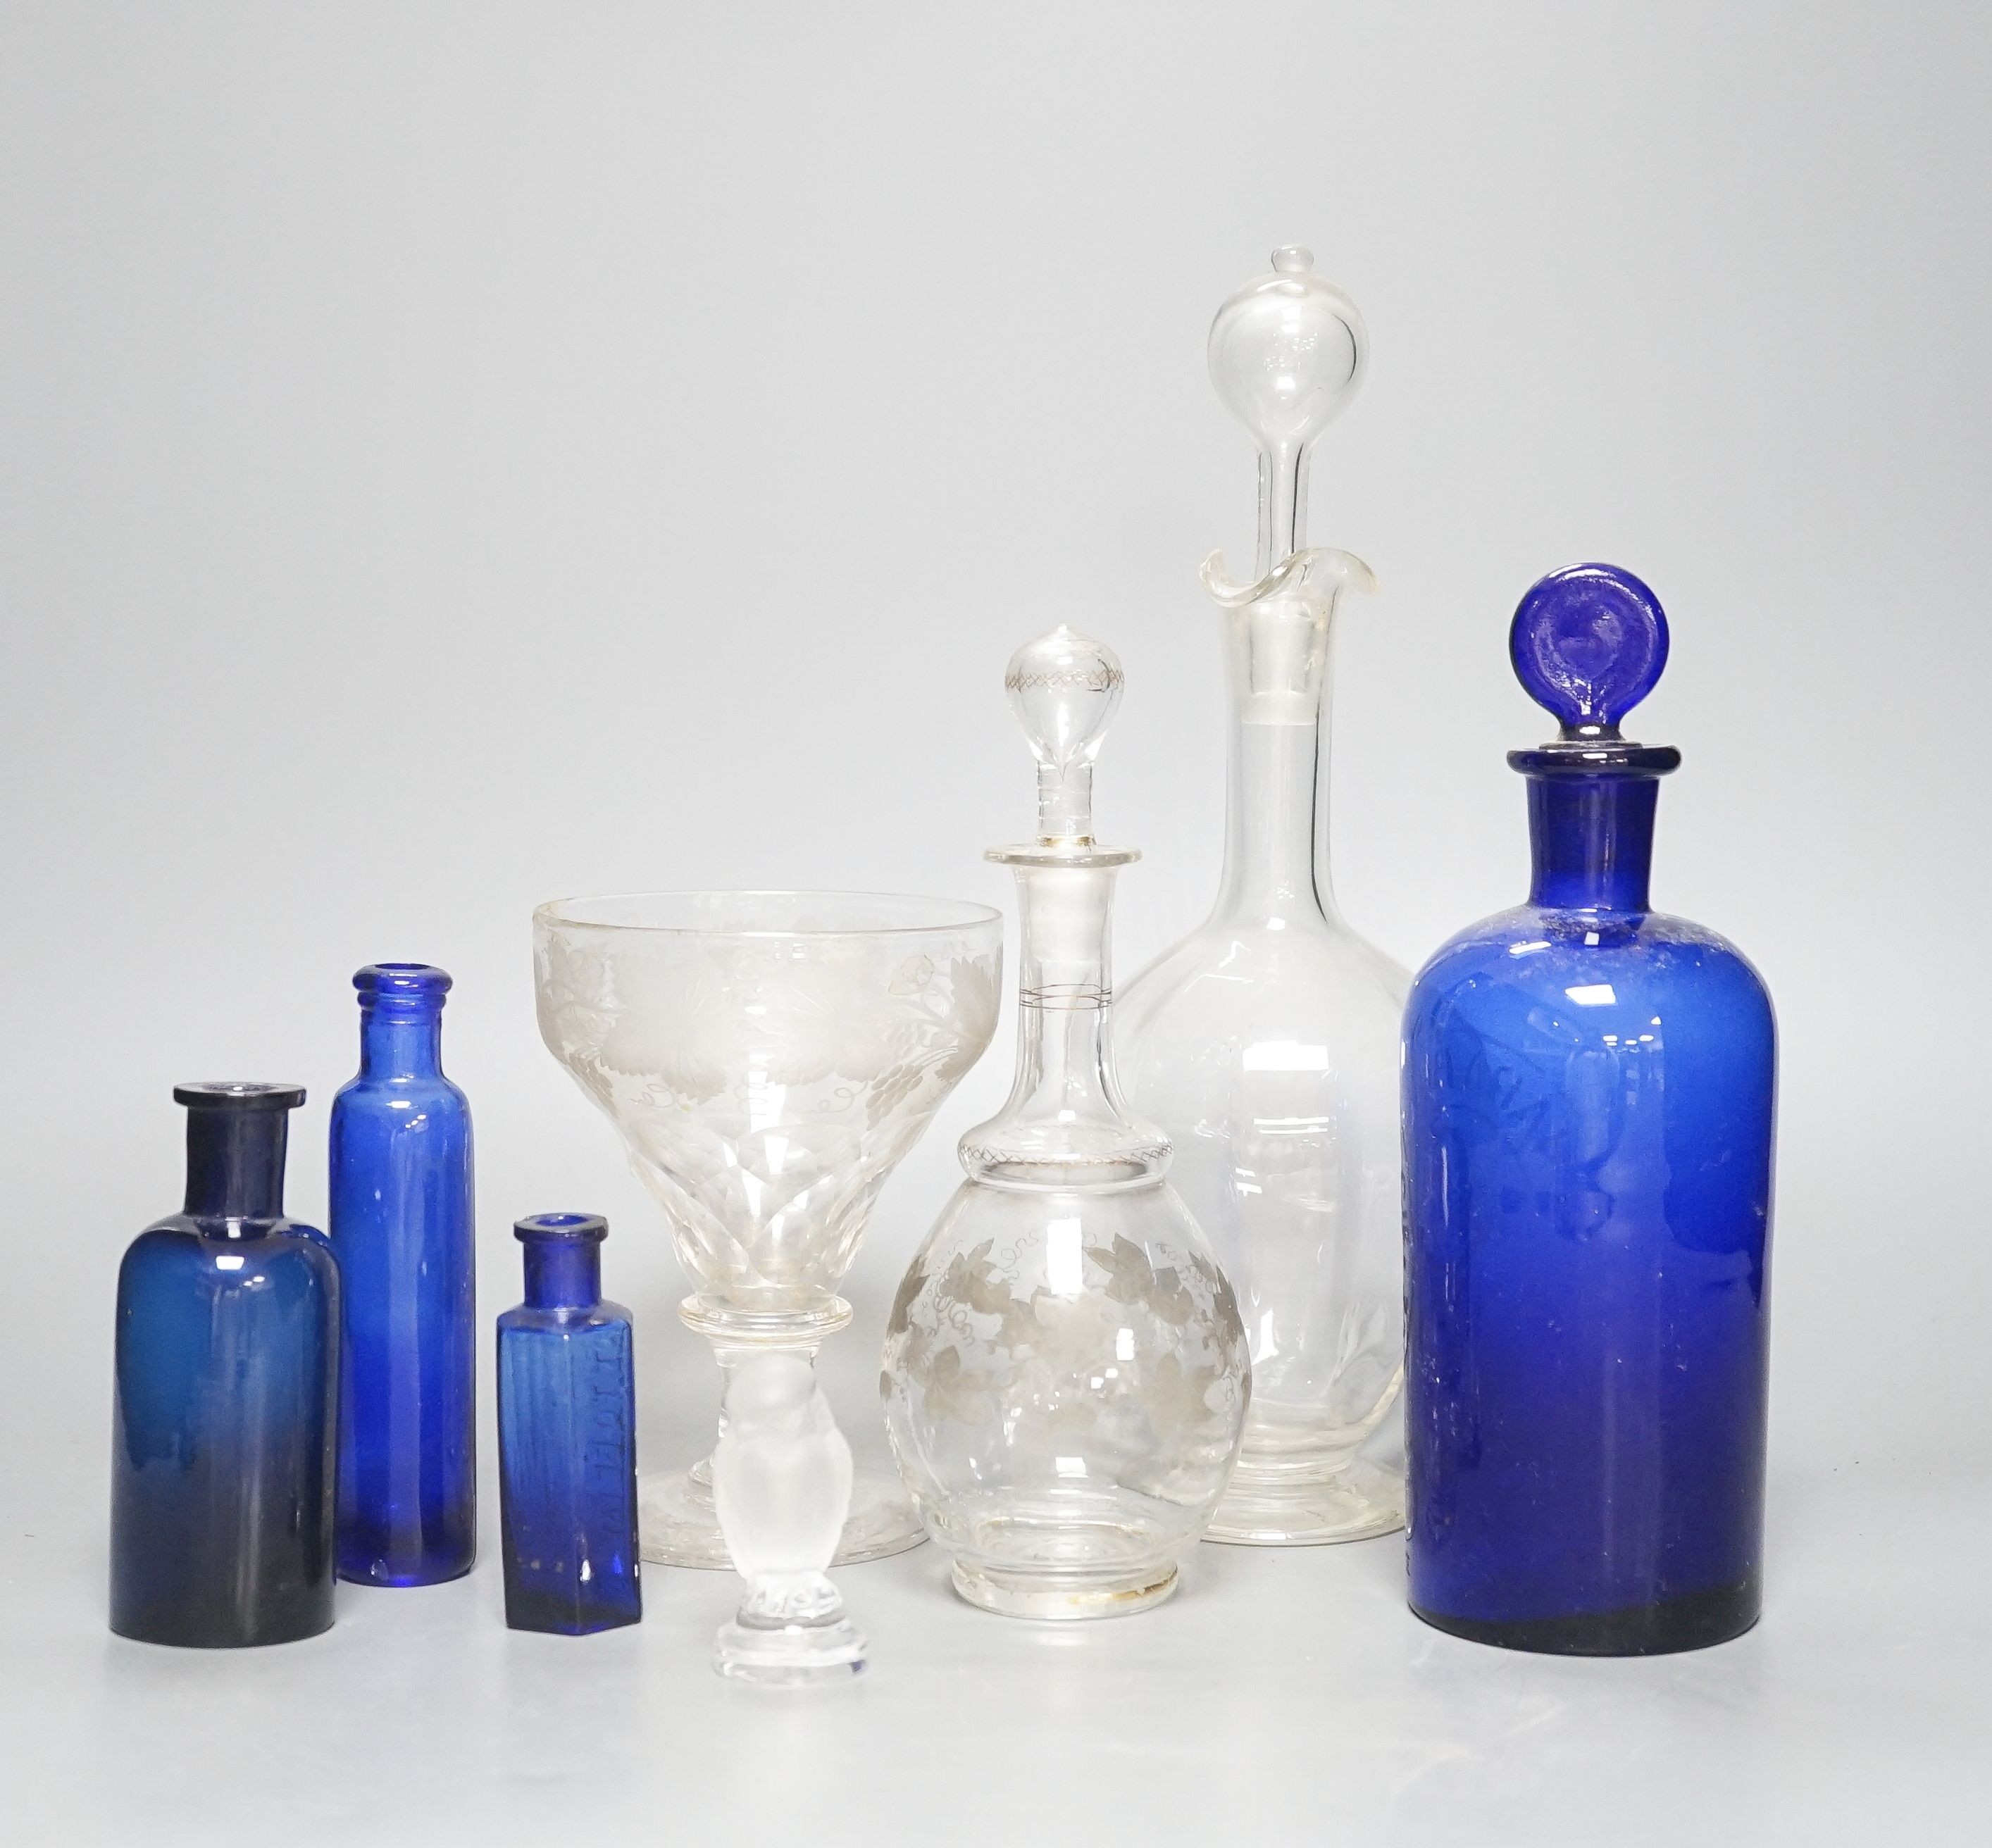 A Lalique frosted glass bird, etched Wedgwood ‘plant a tree ‘73’ glass, other etched glasses, decanters and blue glass pharmacy bottles